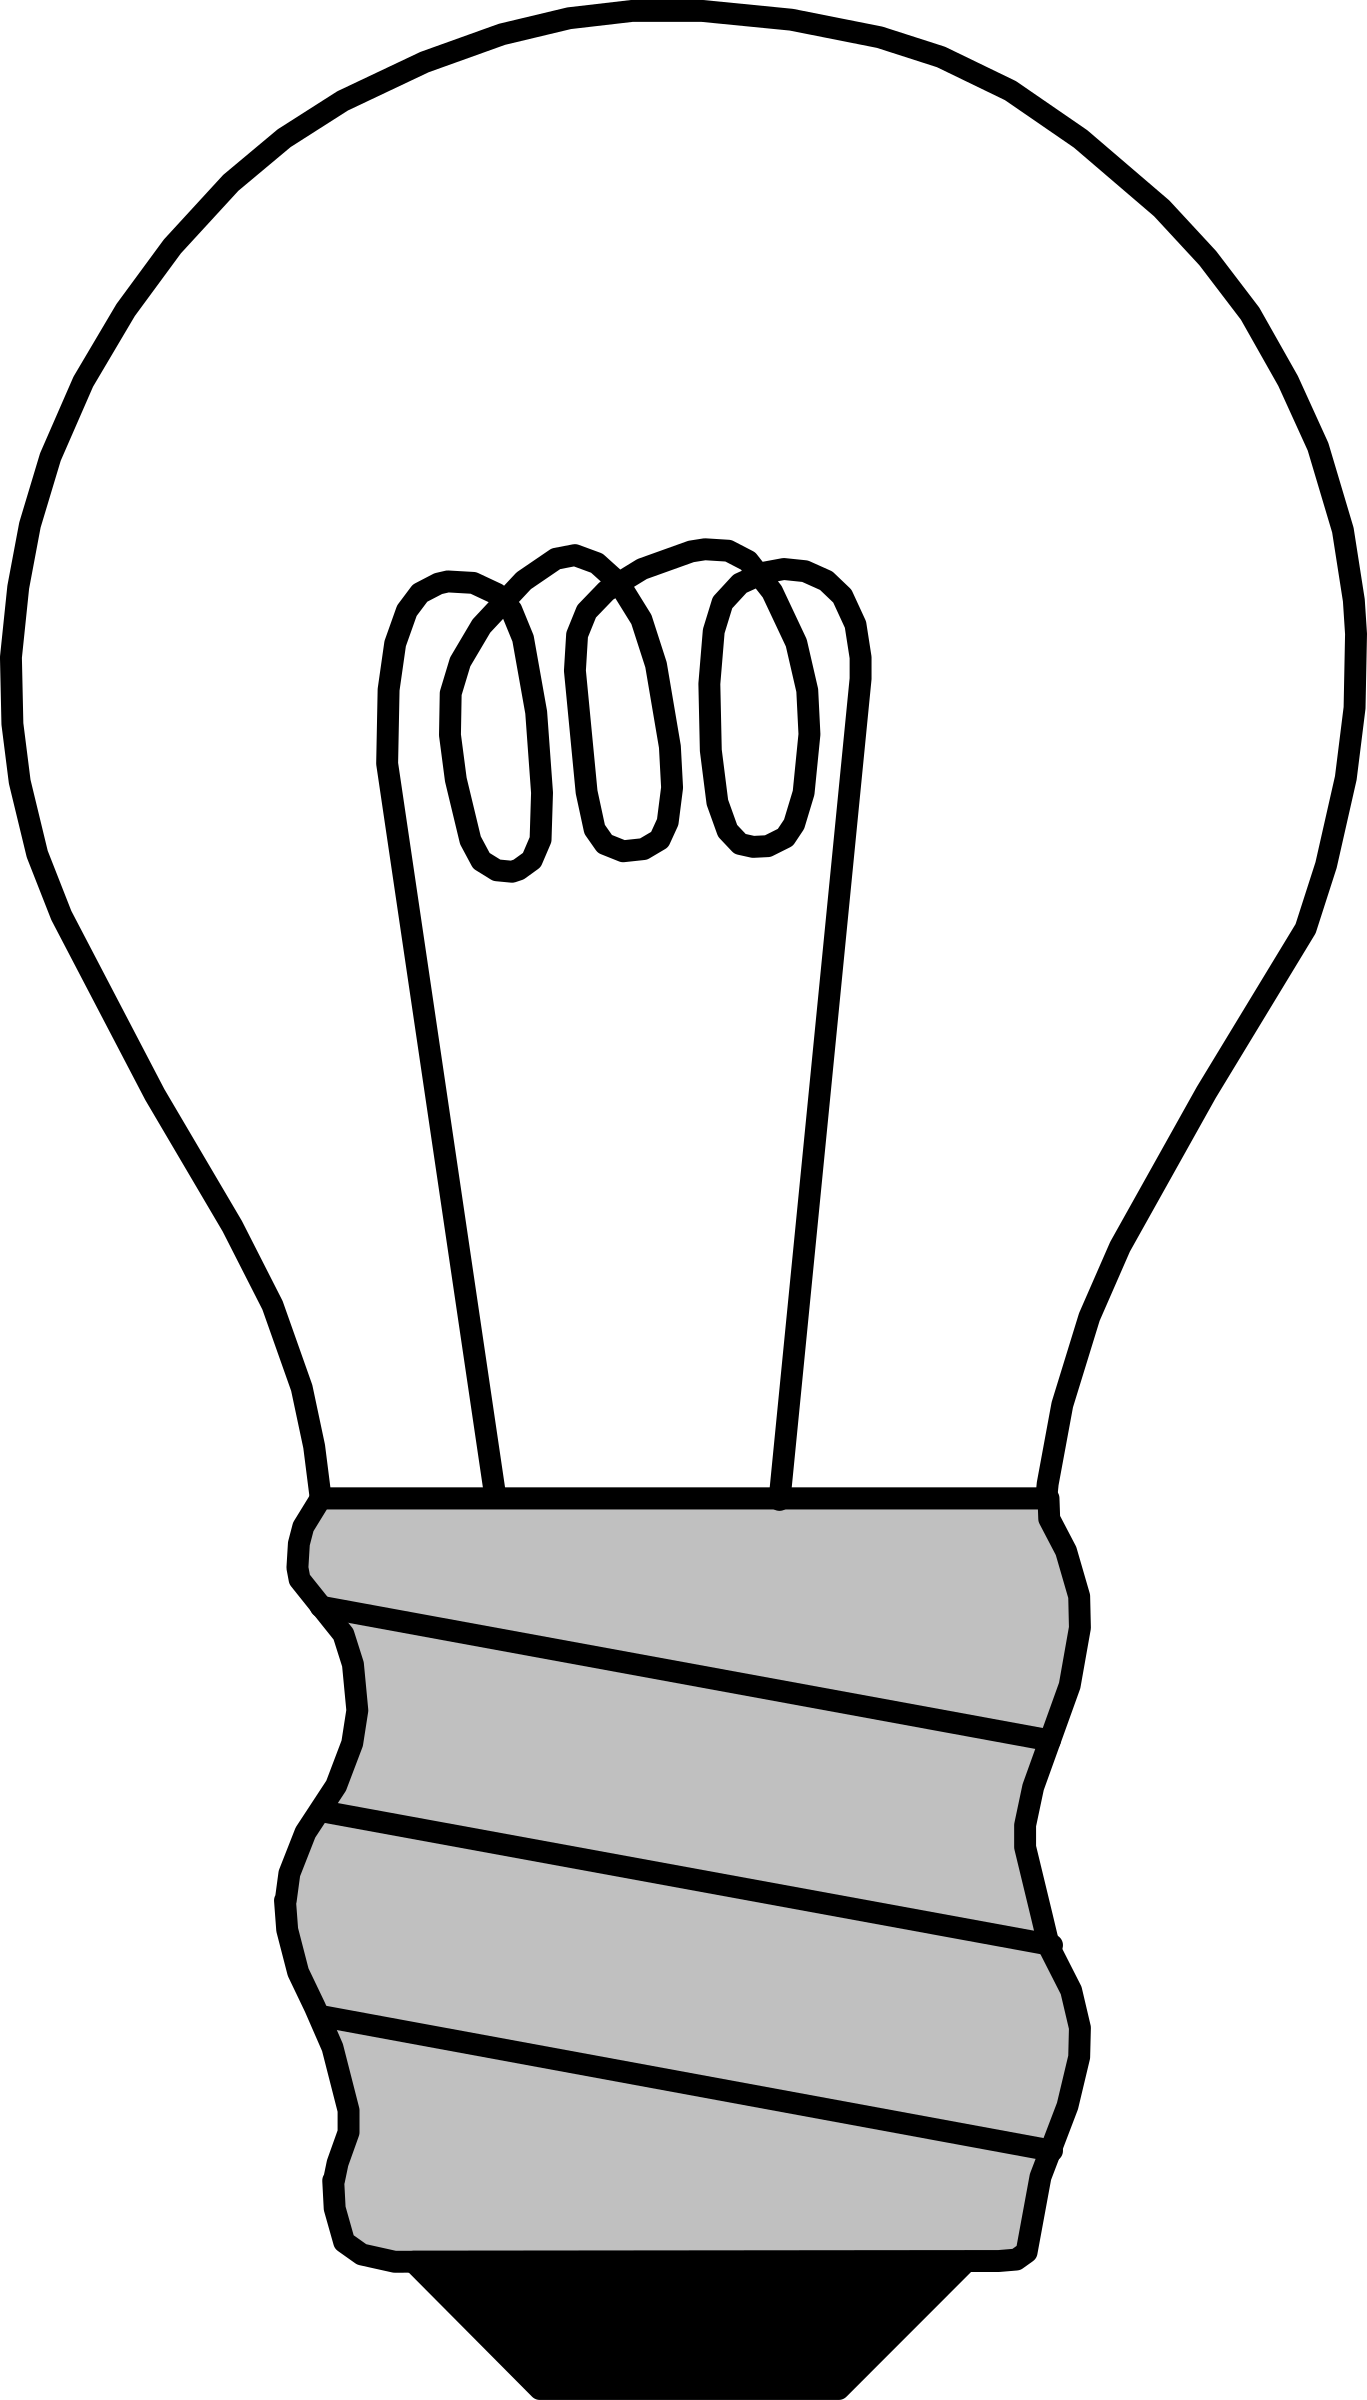 coloring-pages-light-bulb-objects-printable-coloring-pages